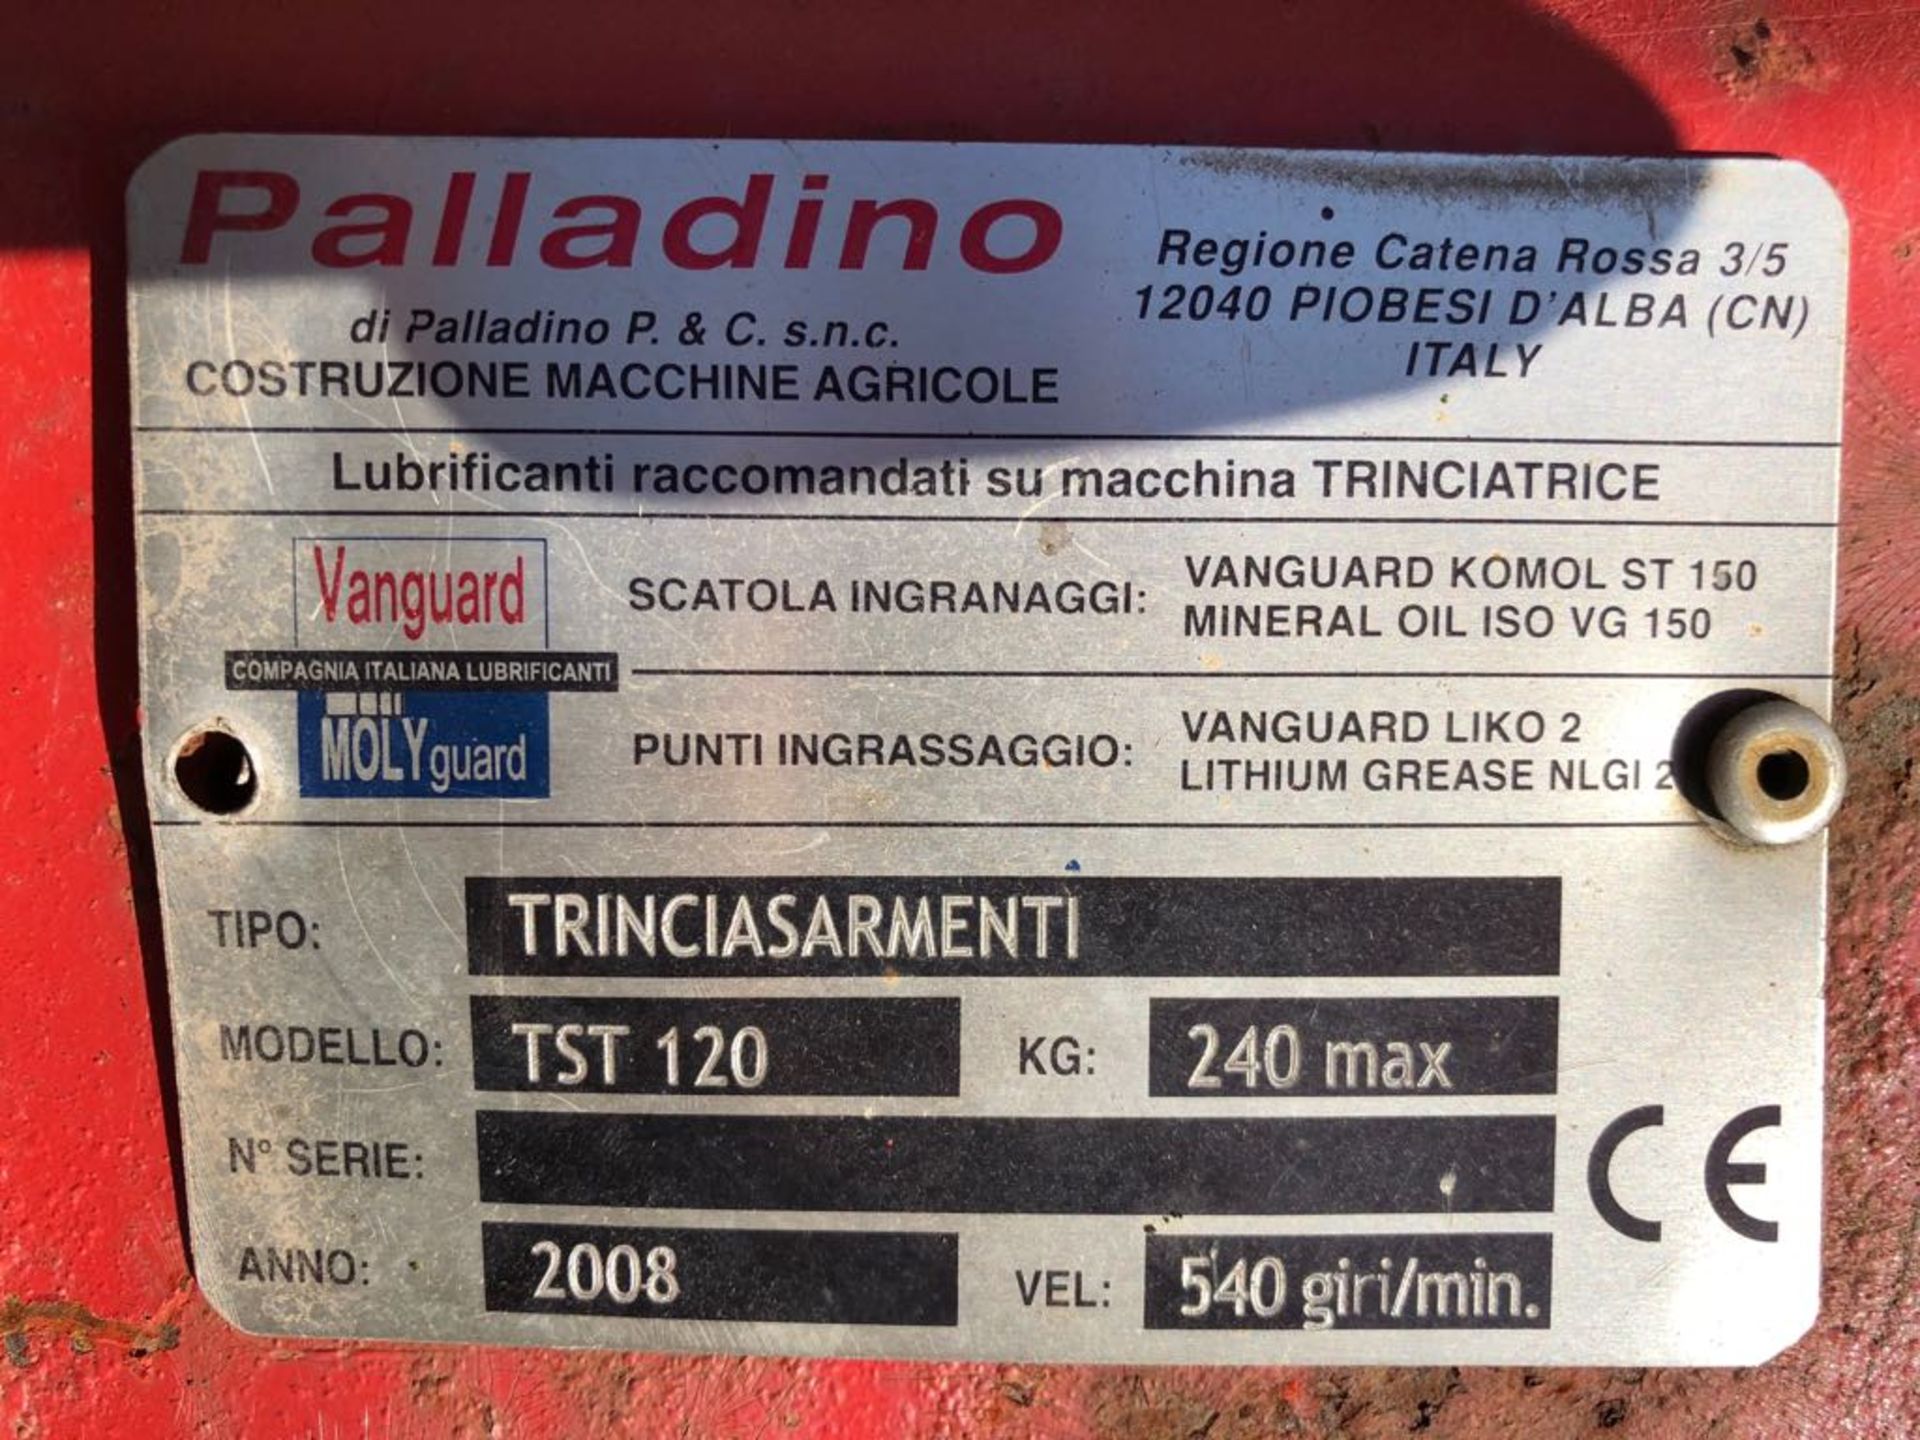 2008 PALLADINO TRINCIASARMENTI 4FT FLAIL MOWER WITH HEAVY DUTY BLADES FOR A COMPACT TRACTOR - Image 5 of 10